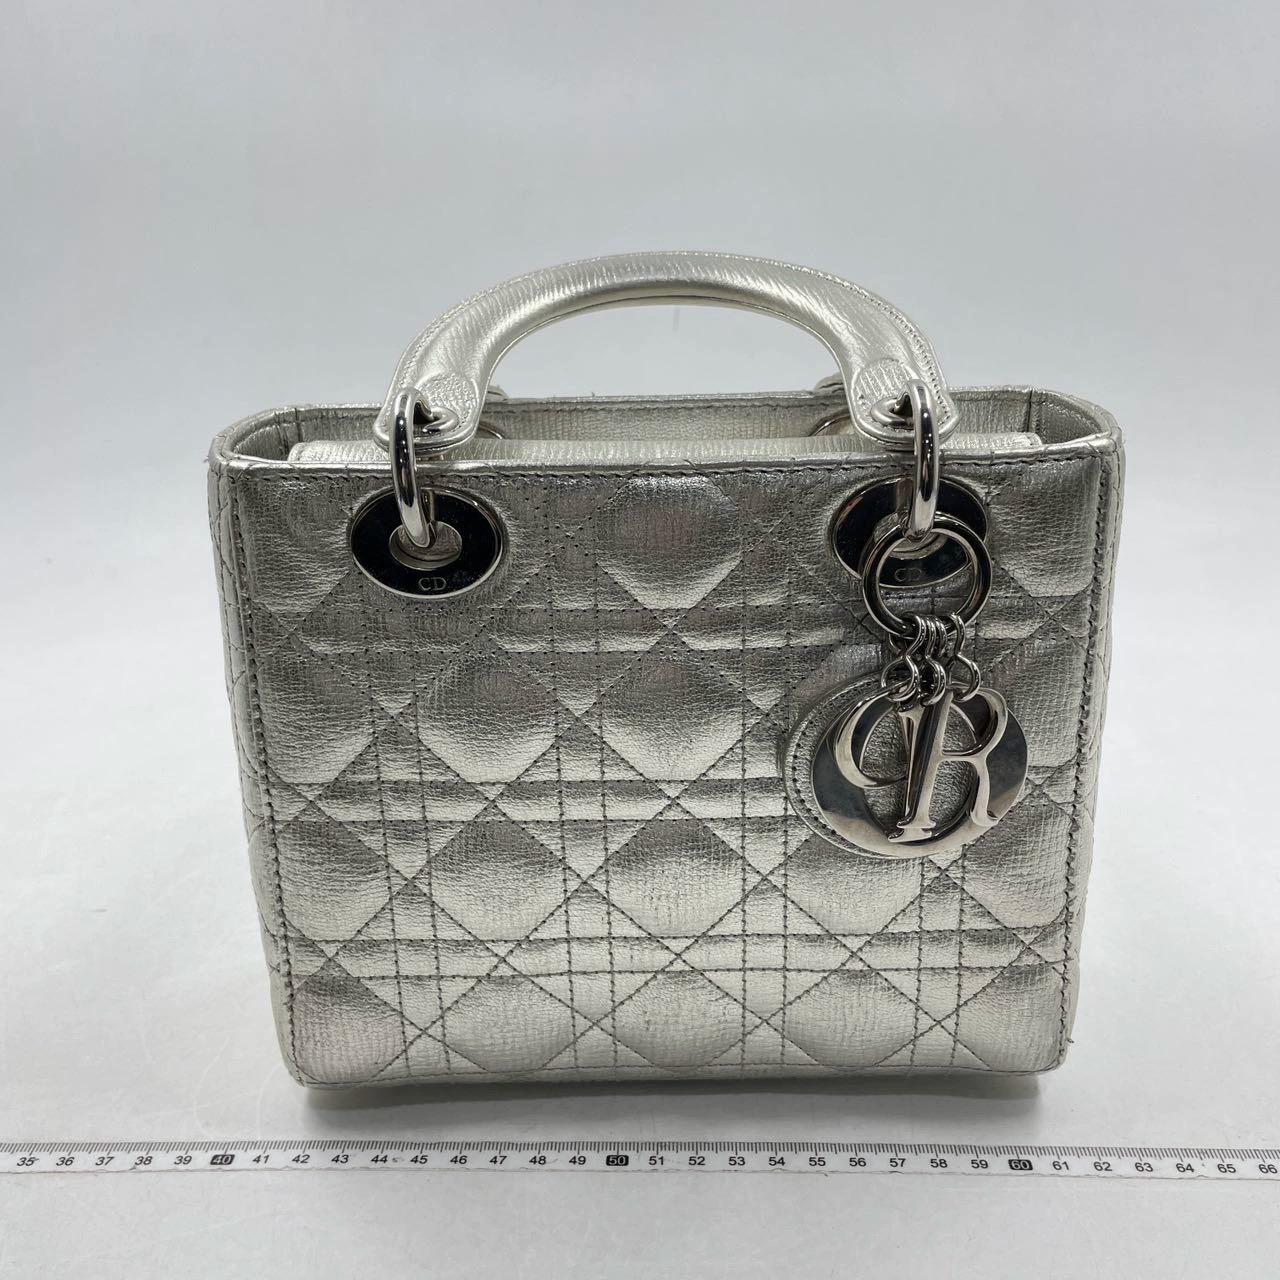 Lady Dior ABCdior Small Silver Cannage Lambskin Handbag with Strap In Excellent Condition For Sale In AUBERVILLIERS, FR